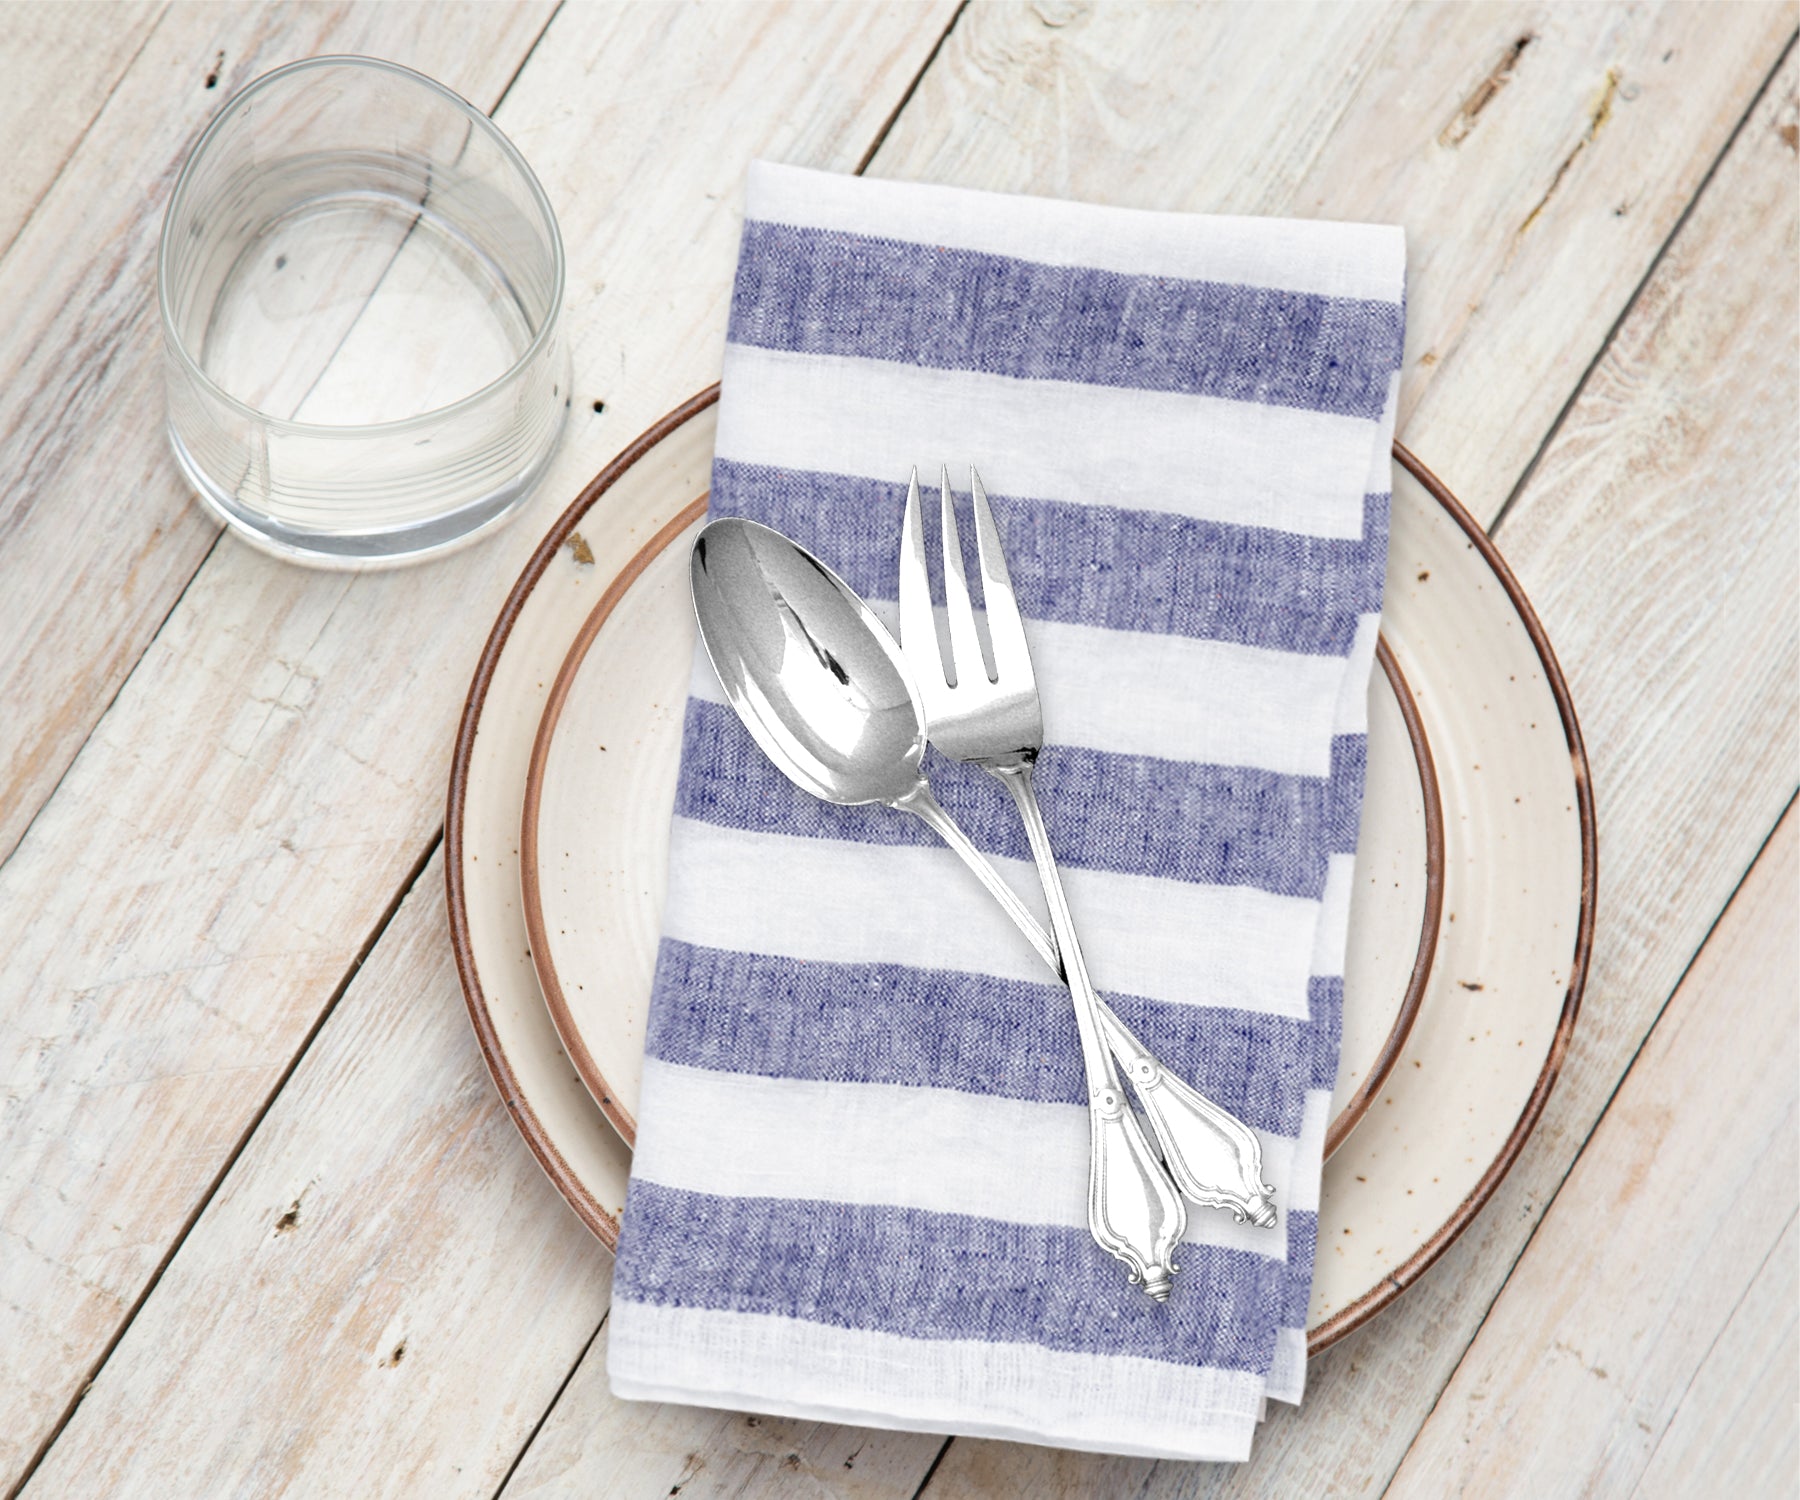 Neatly stacked Italian Stripe Napkins in blue and white, ready for table use